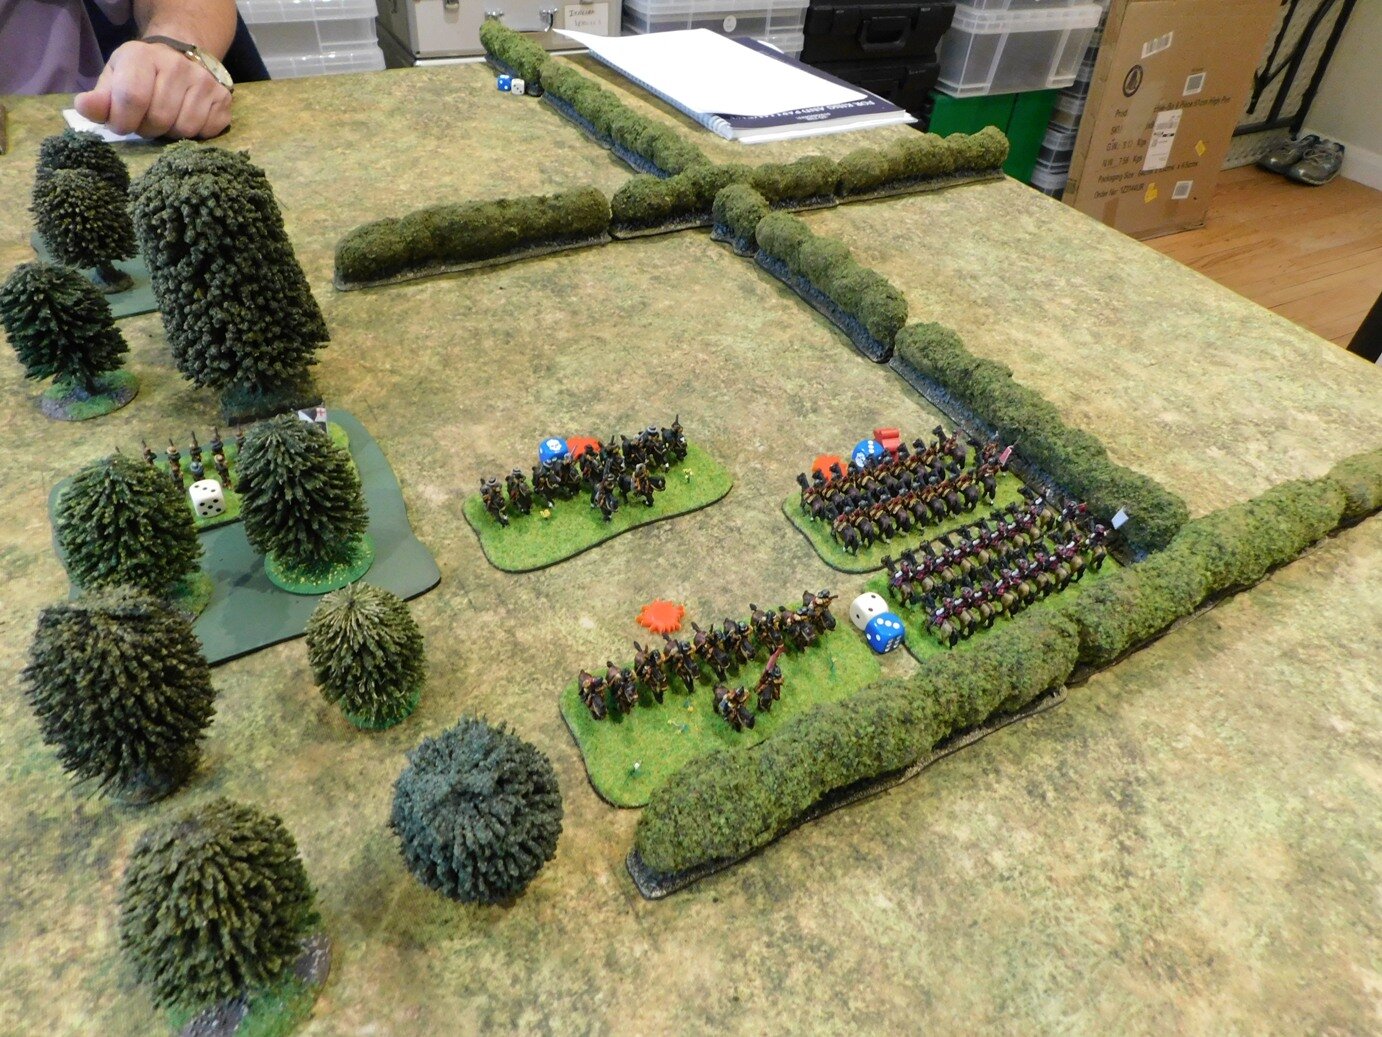 Meanwhile, on the Other Flank, the Cavalry Clash is going my way